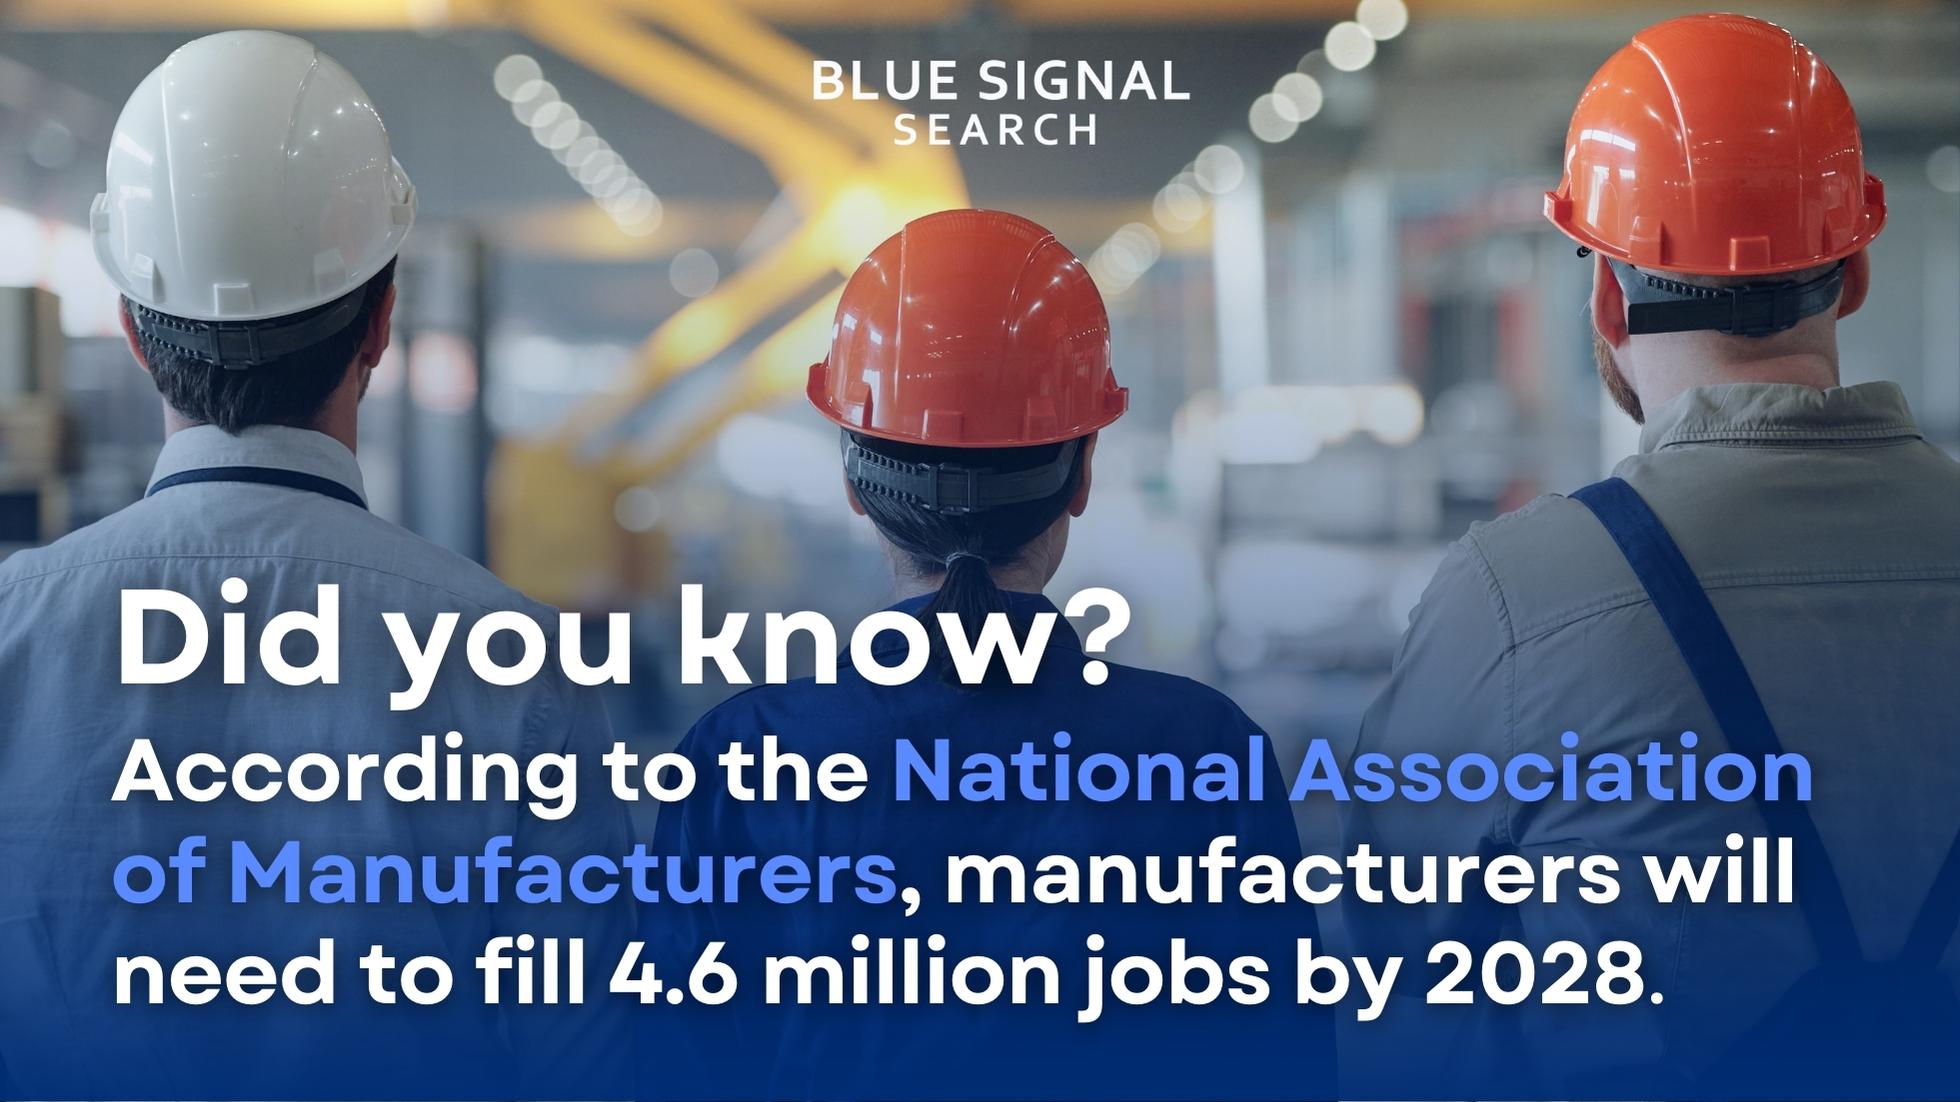 Manufacturing workforce fact about the need to fill 4.6 million jobs by 2028 with an image of employees looking ahead in a factory.